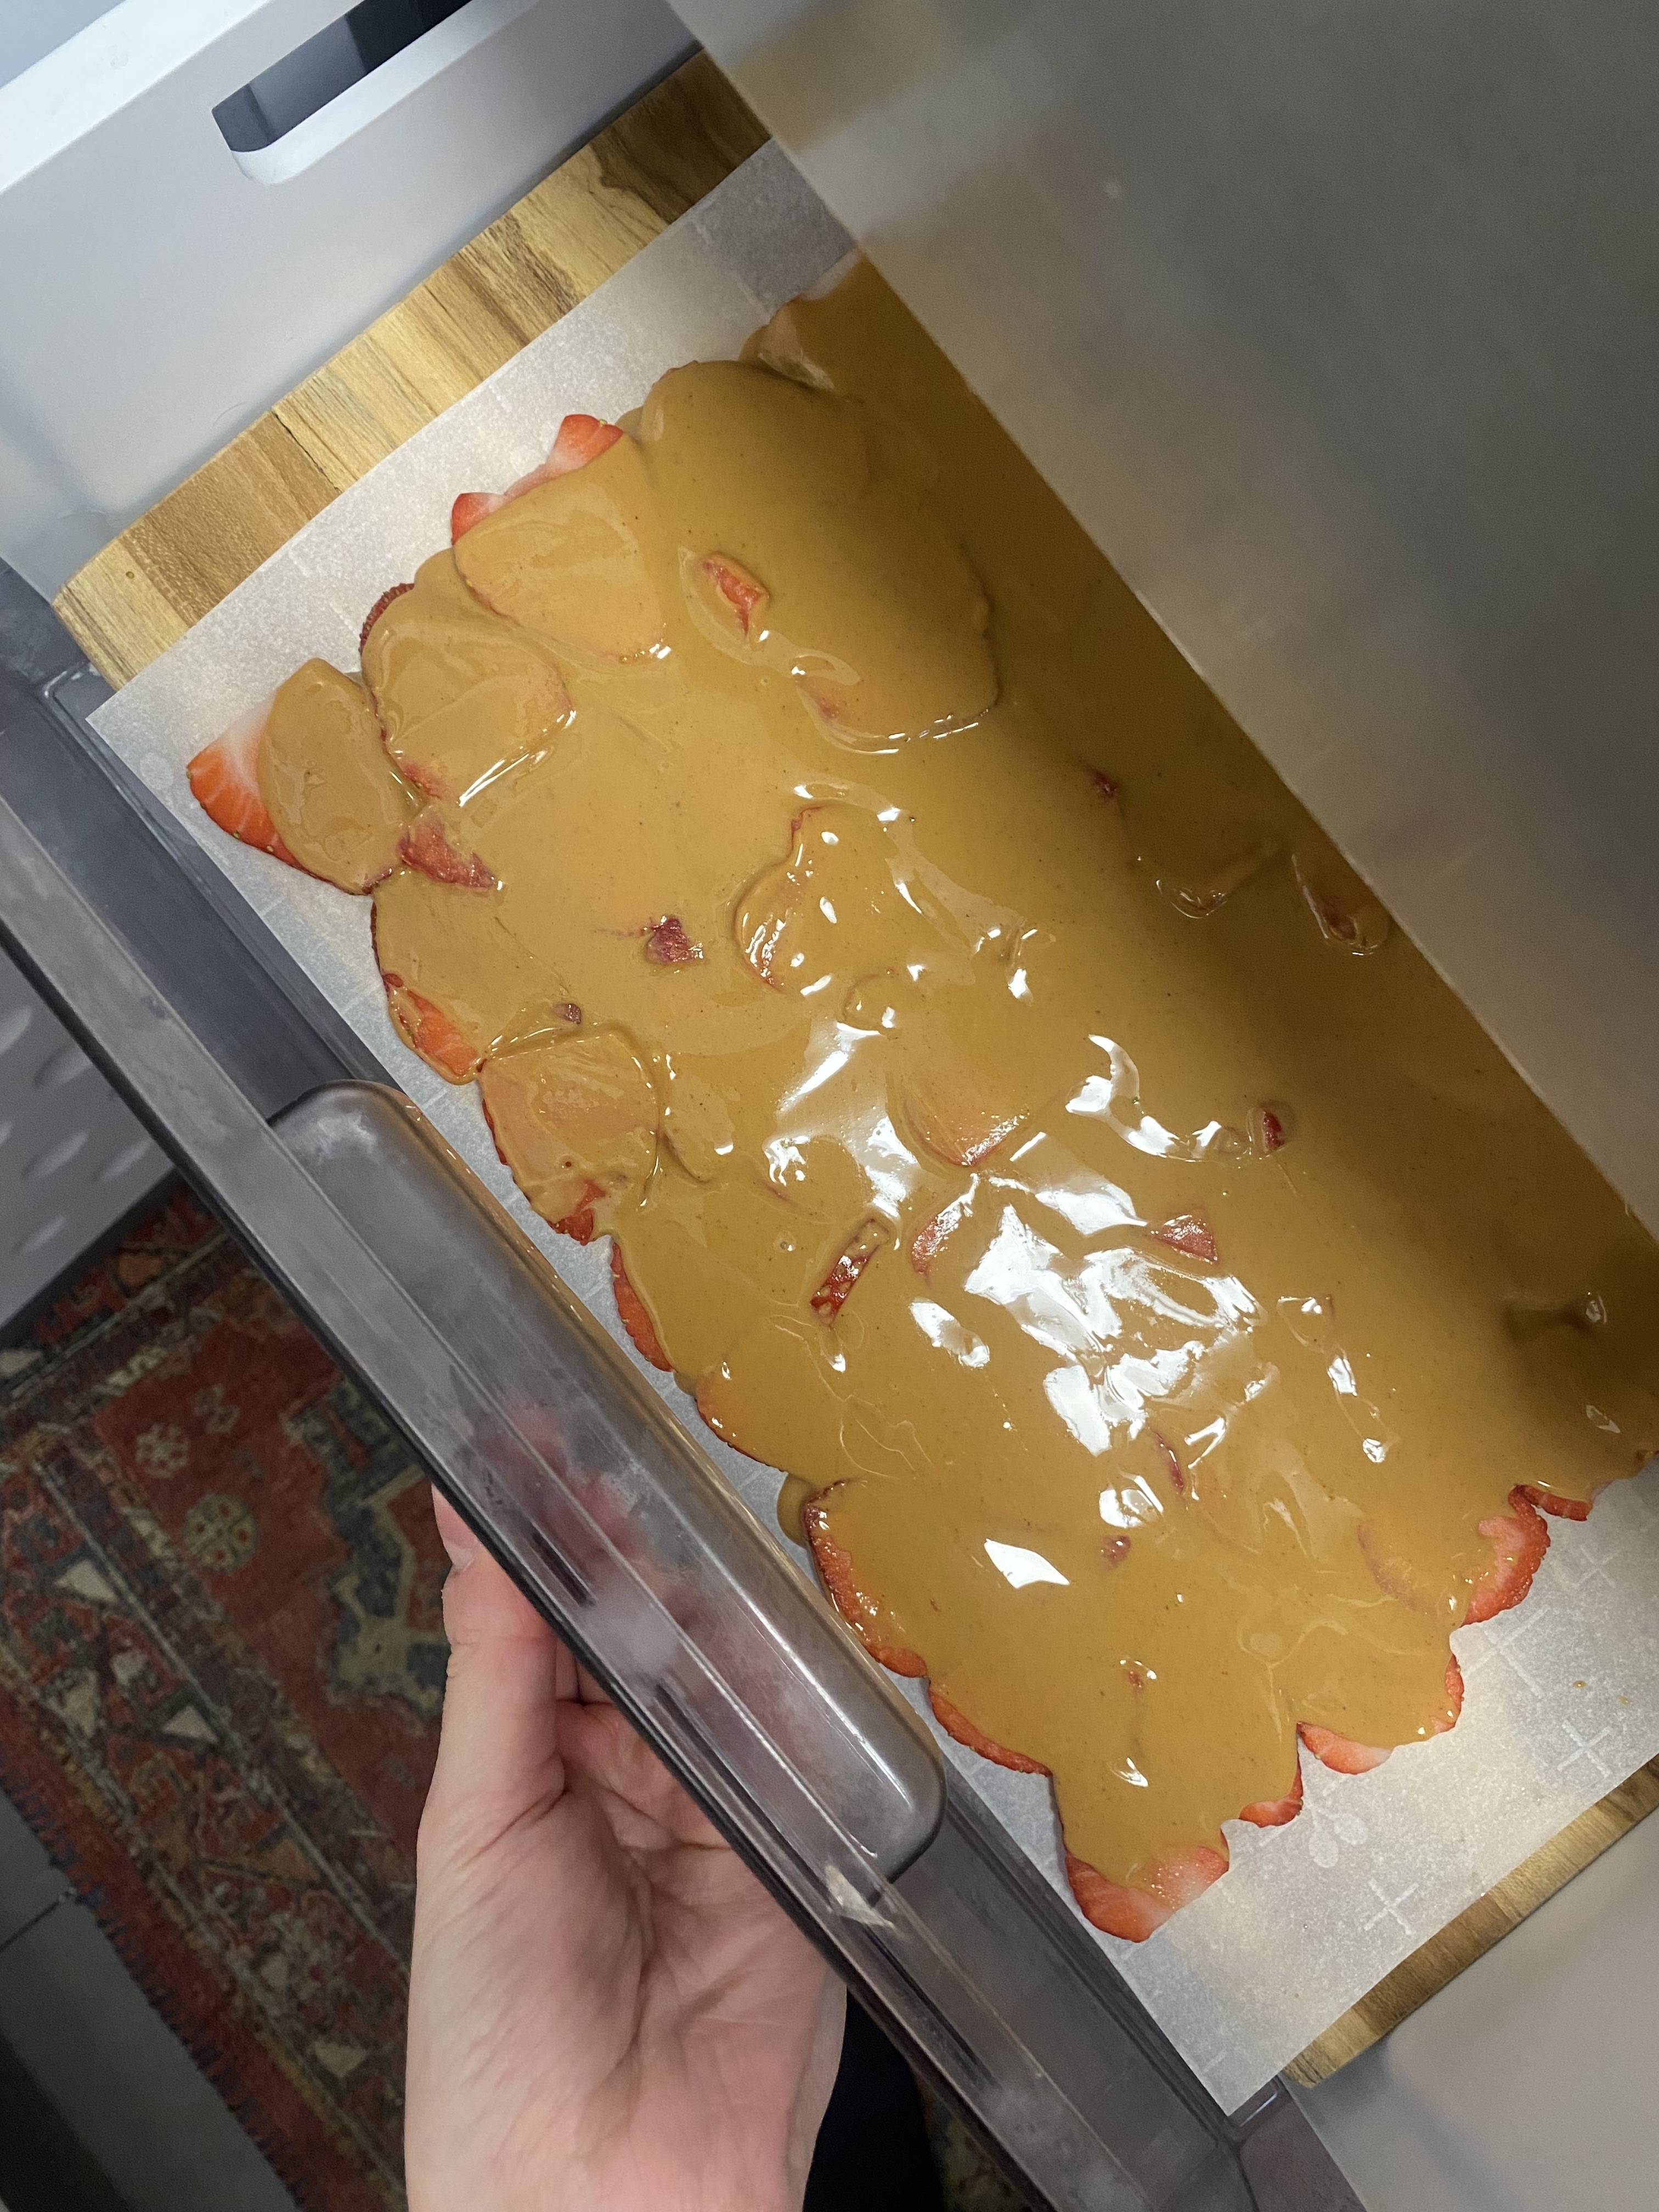 The strawberry peanut butter layer being put in a freezer